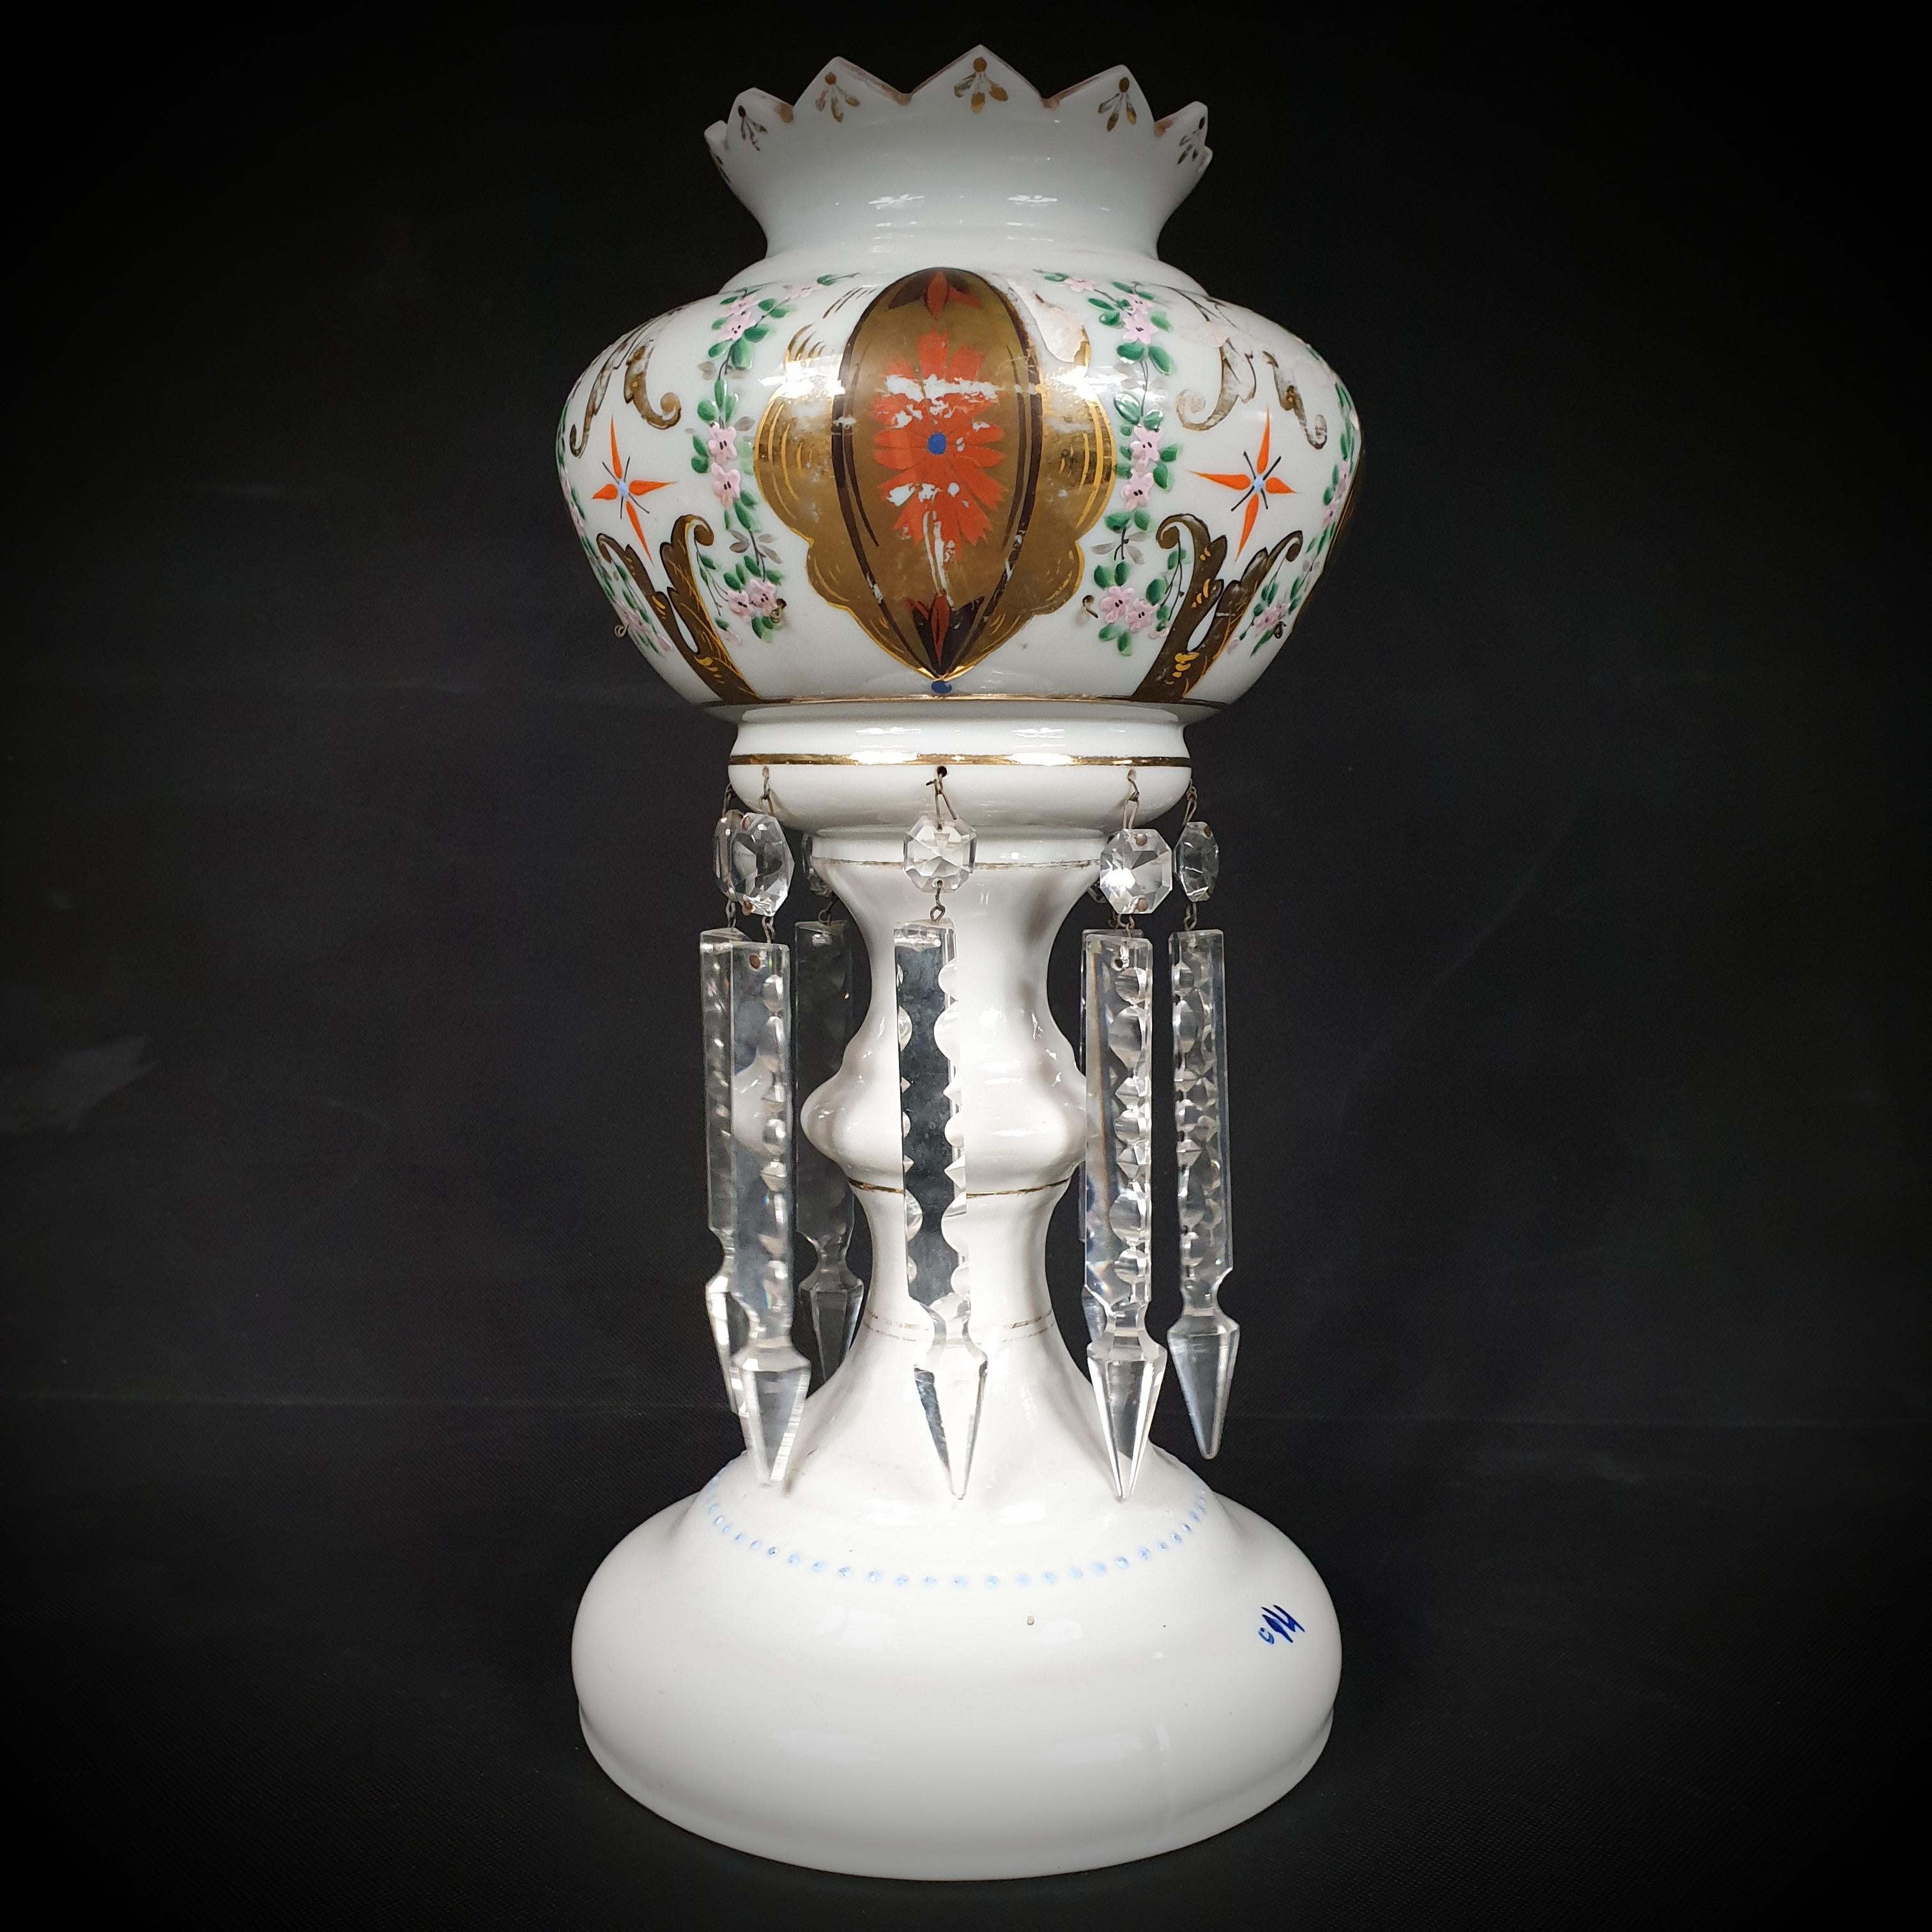 This luster takes the form of a goblet, and it is covered in stunning Islamic and Arabic motifs. There's a good chance that the product was made with the Turkish market in mind. It was created in France between the years 1850 and 1920, but the exact